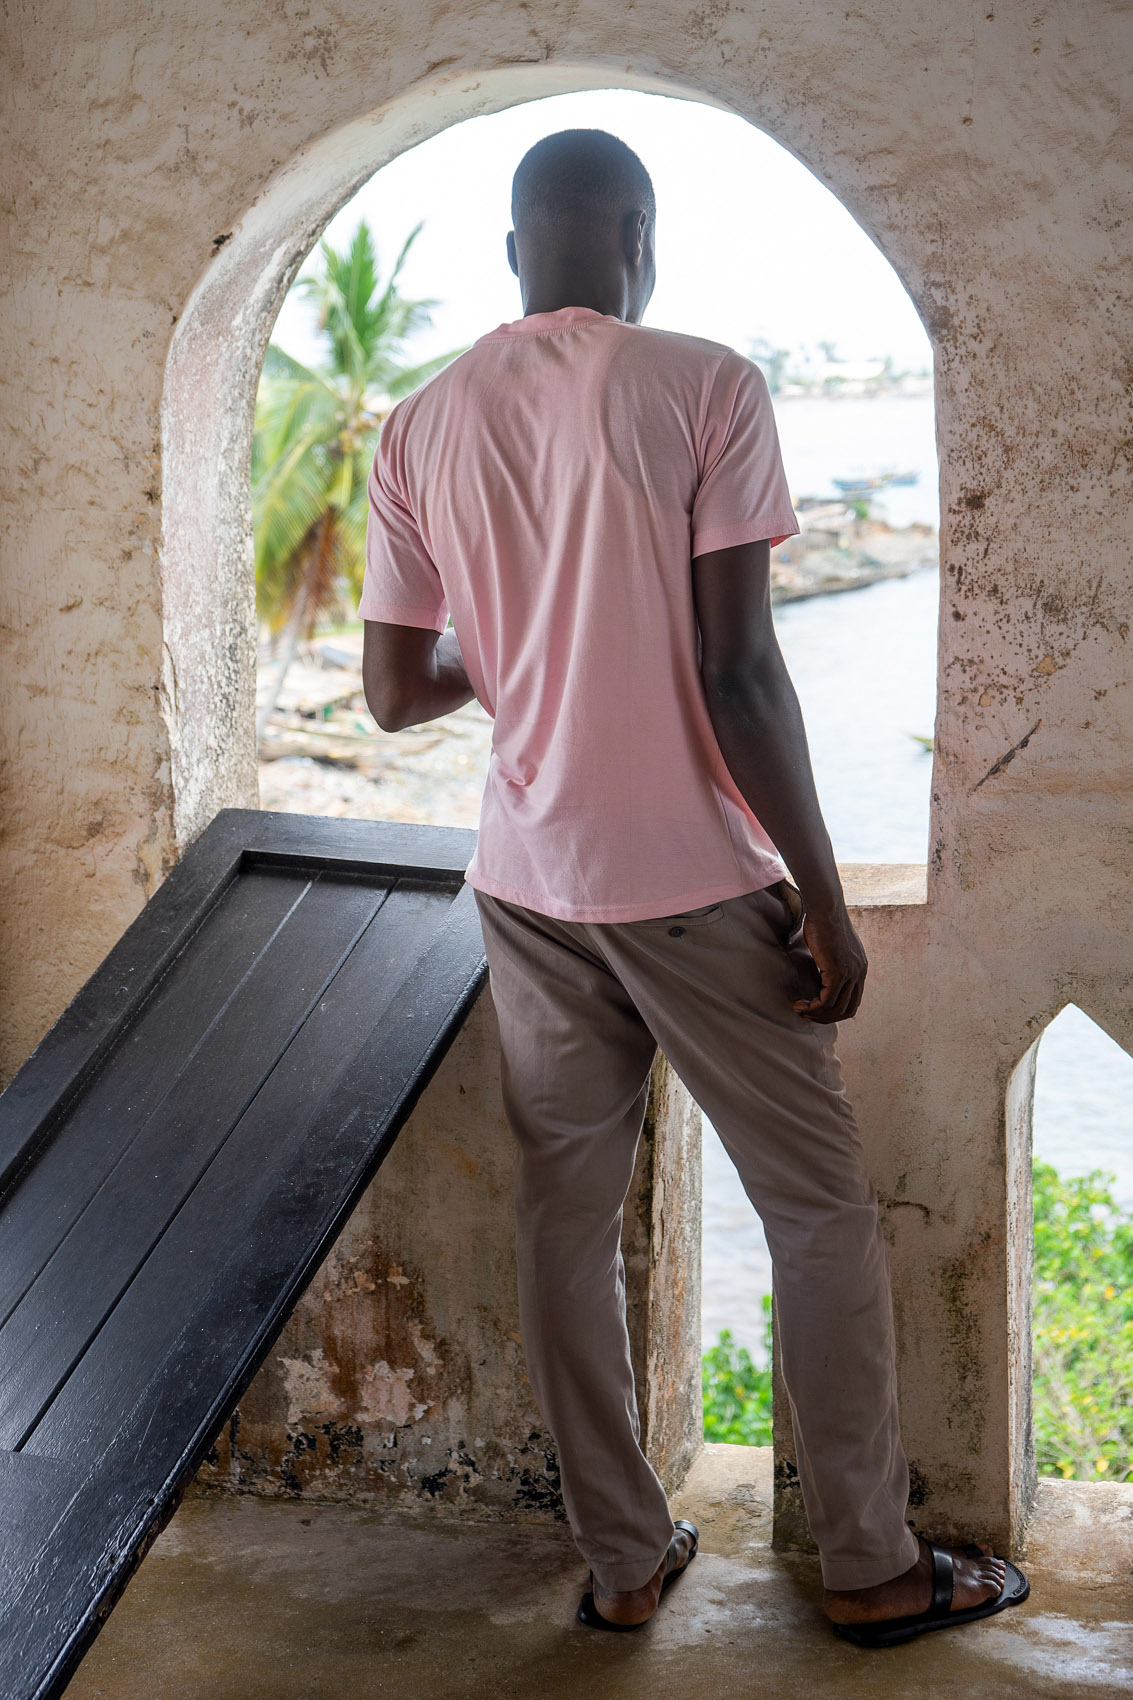 Man in Axim looks out of window